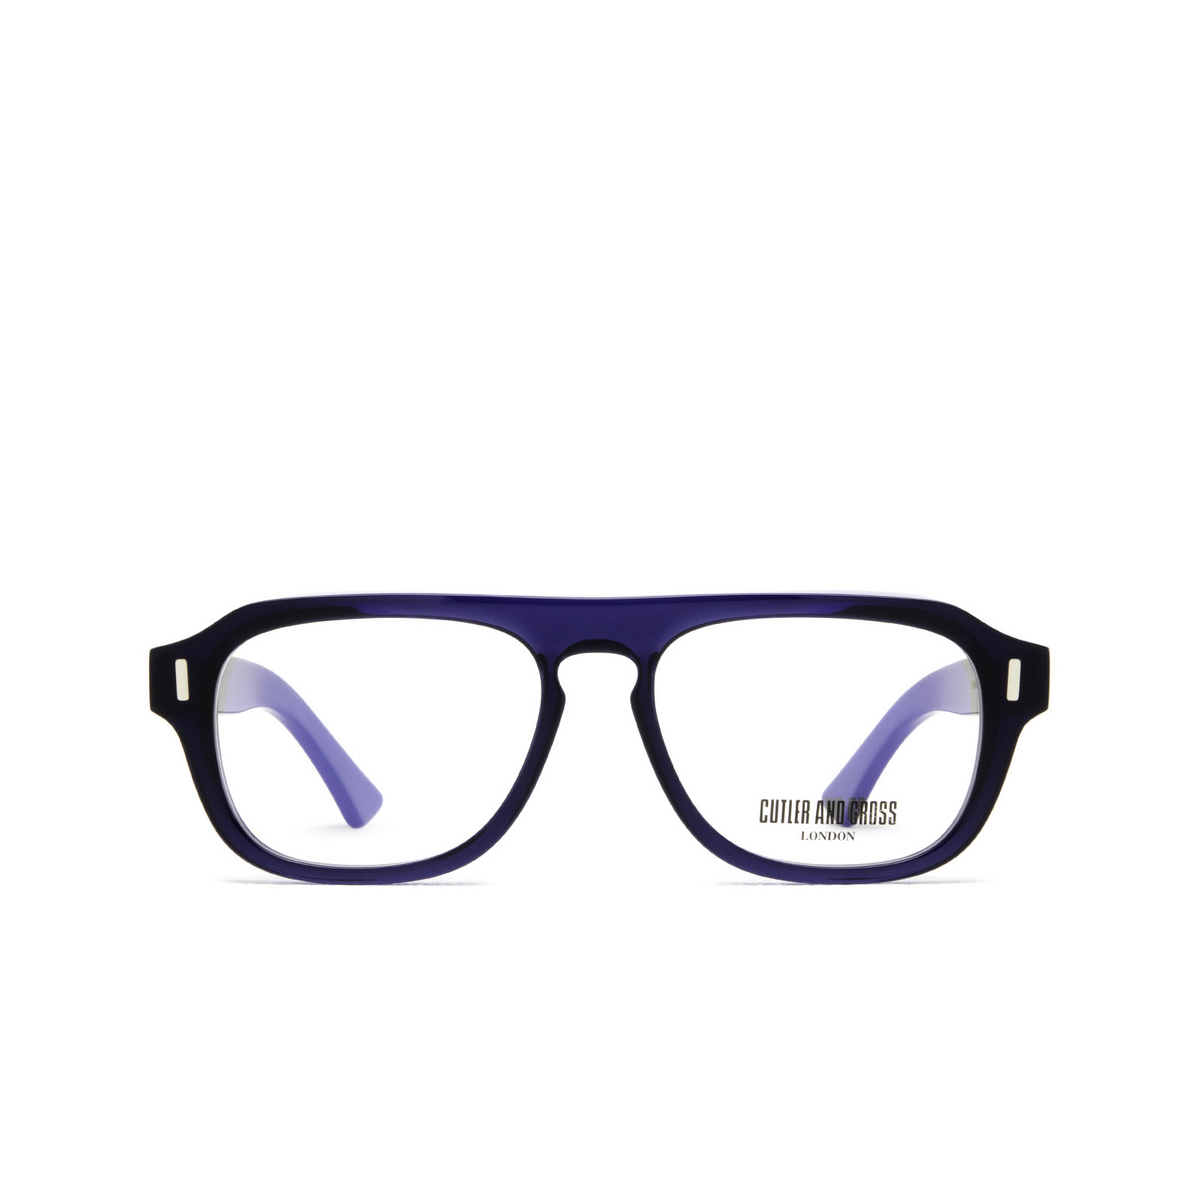 Cutler and Gross® Aviator Eyeglasses: 1319 color 03 Classic Navy Blue - front view